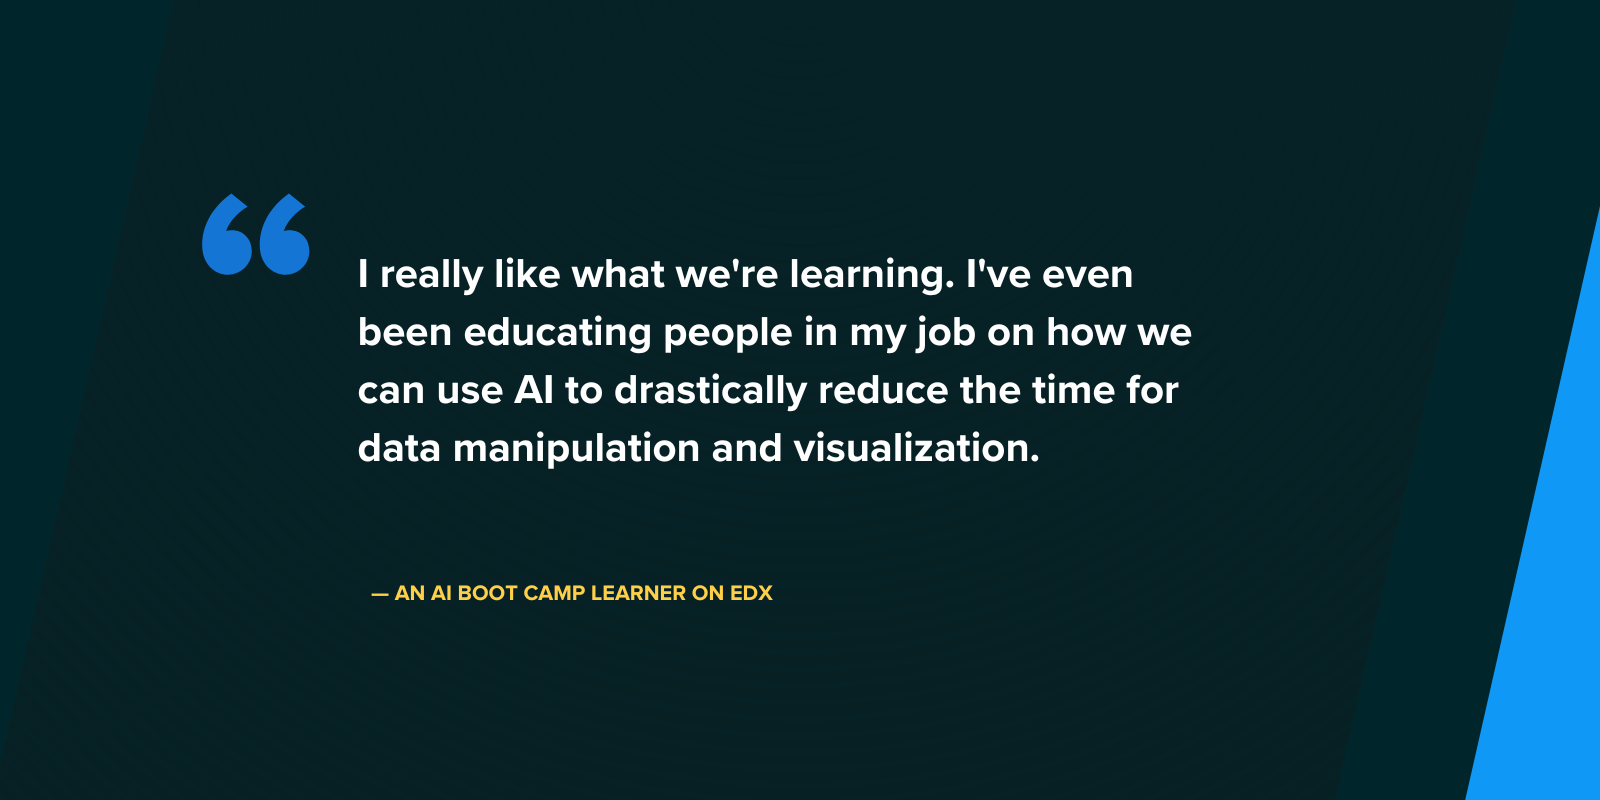 AI quote - BOOT CAMP LEARNER